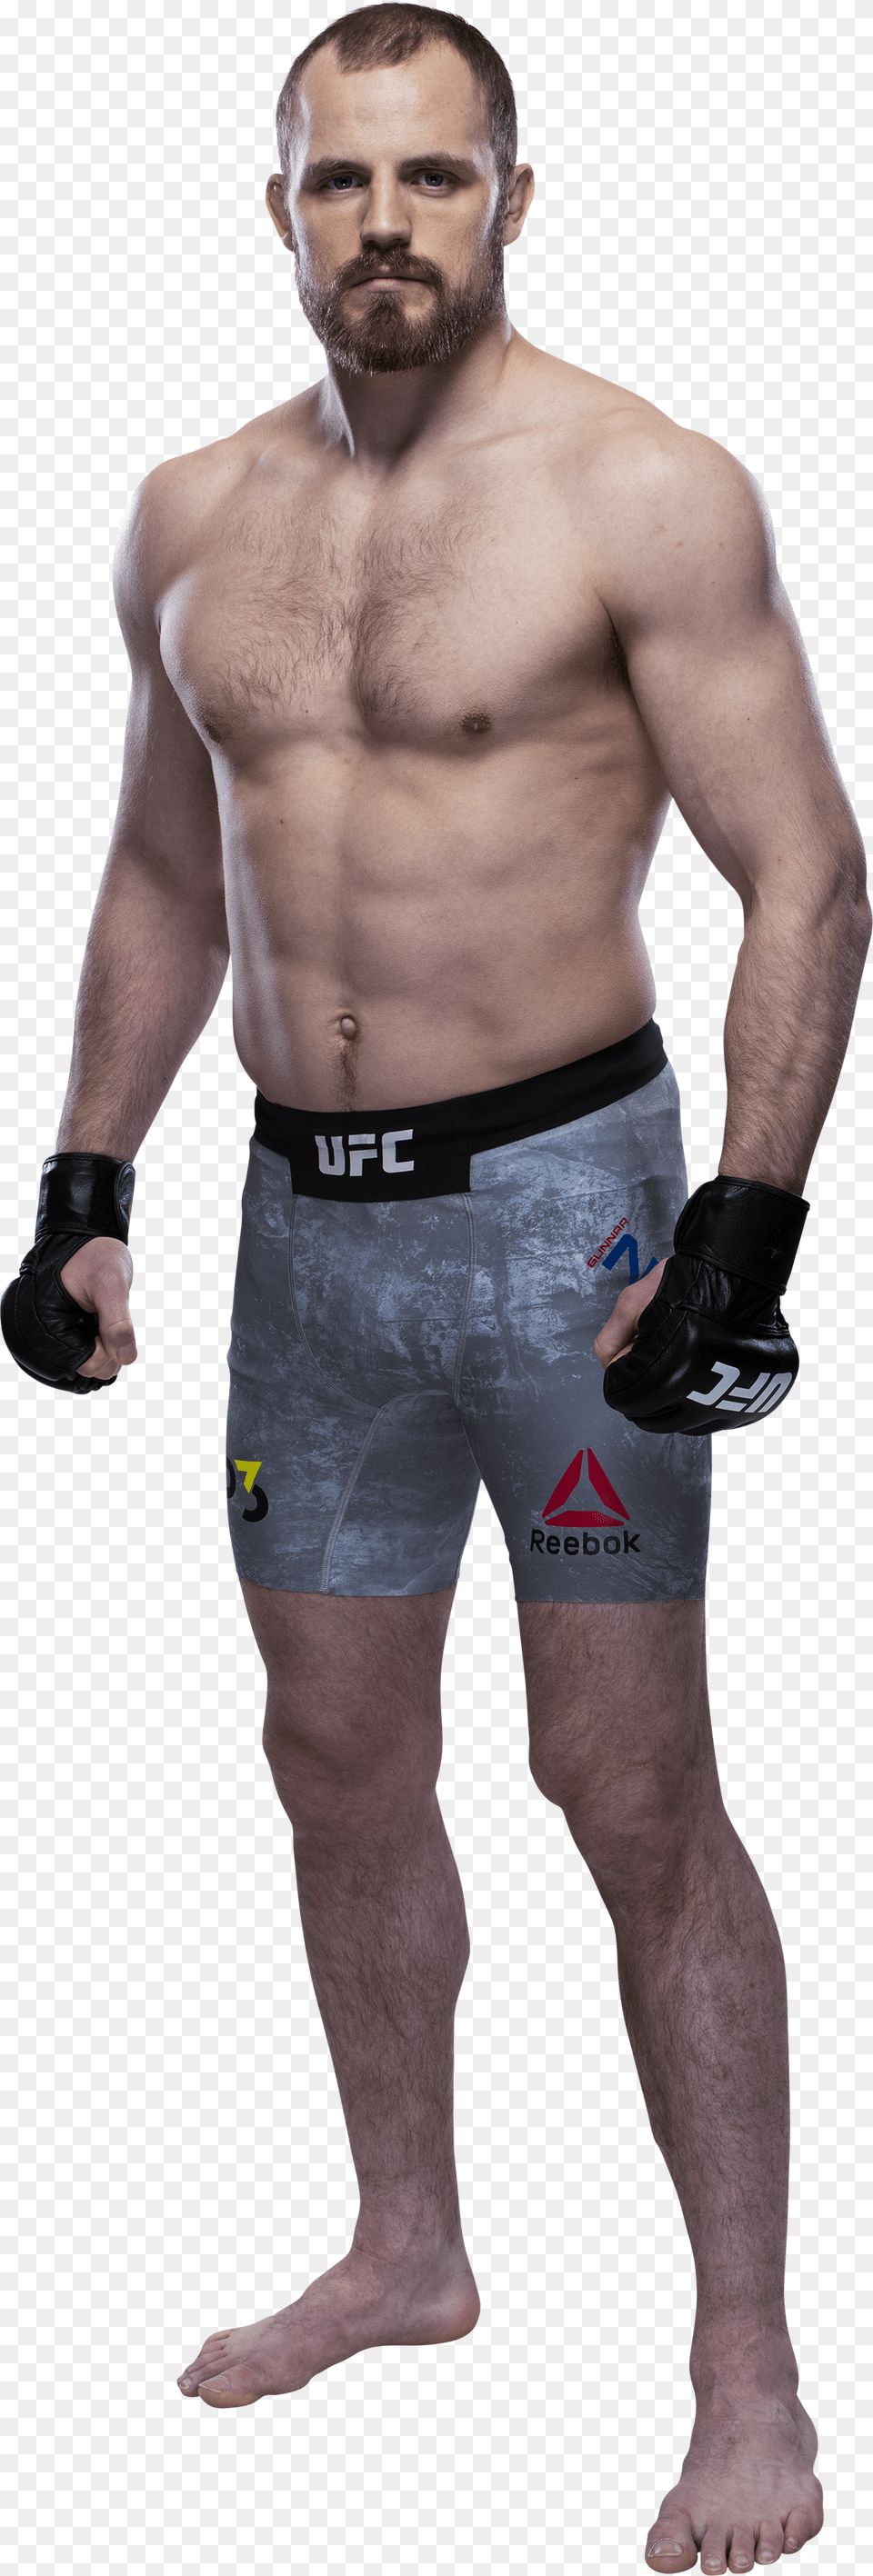 George St Pierre Full Body, Clothing, Glove, Shorts, Adult Free Transparent Png